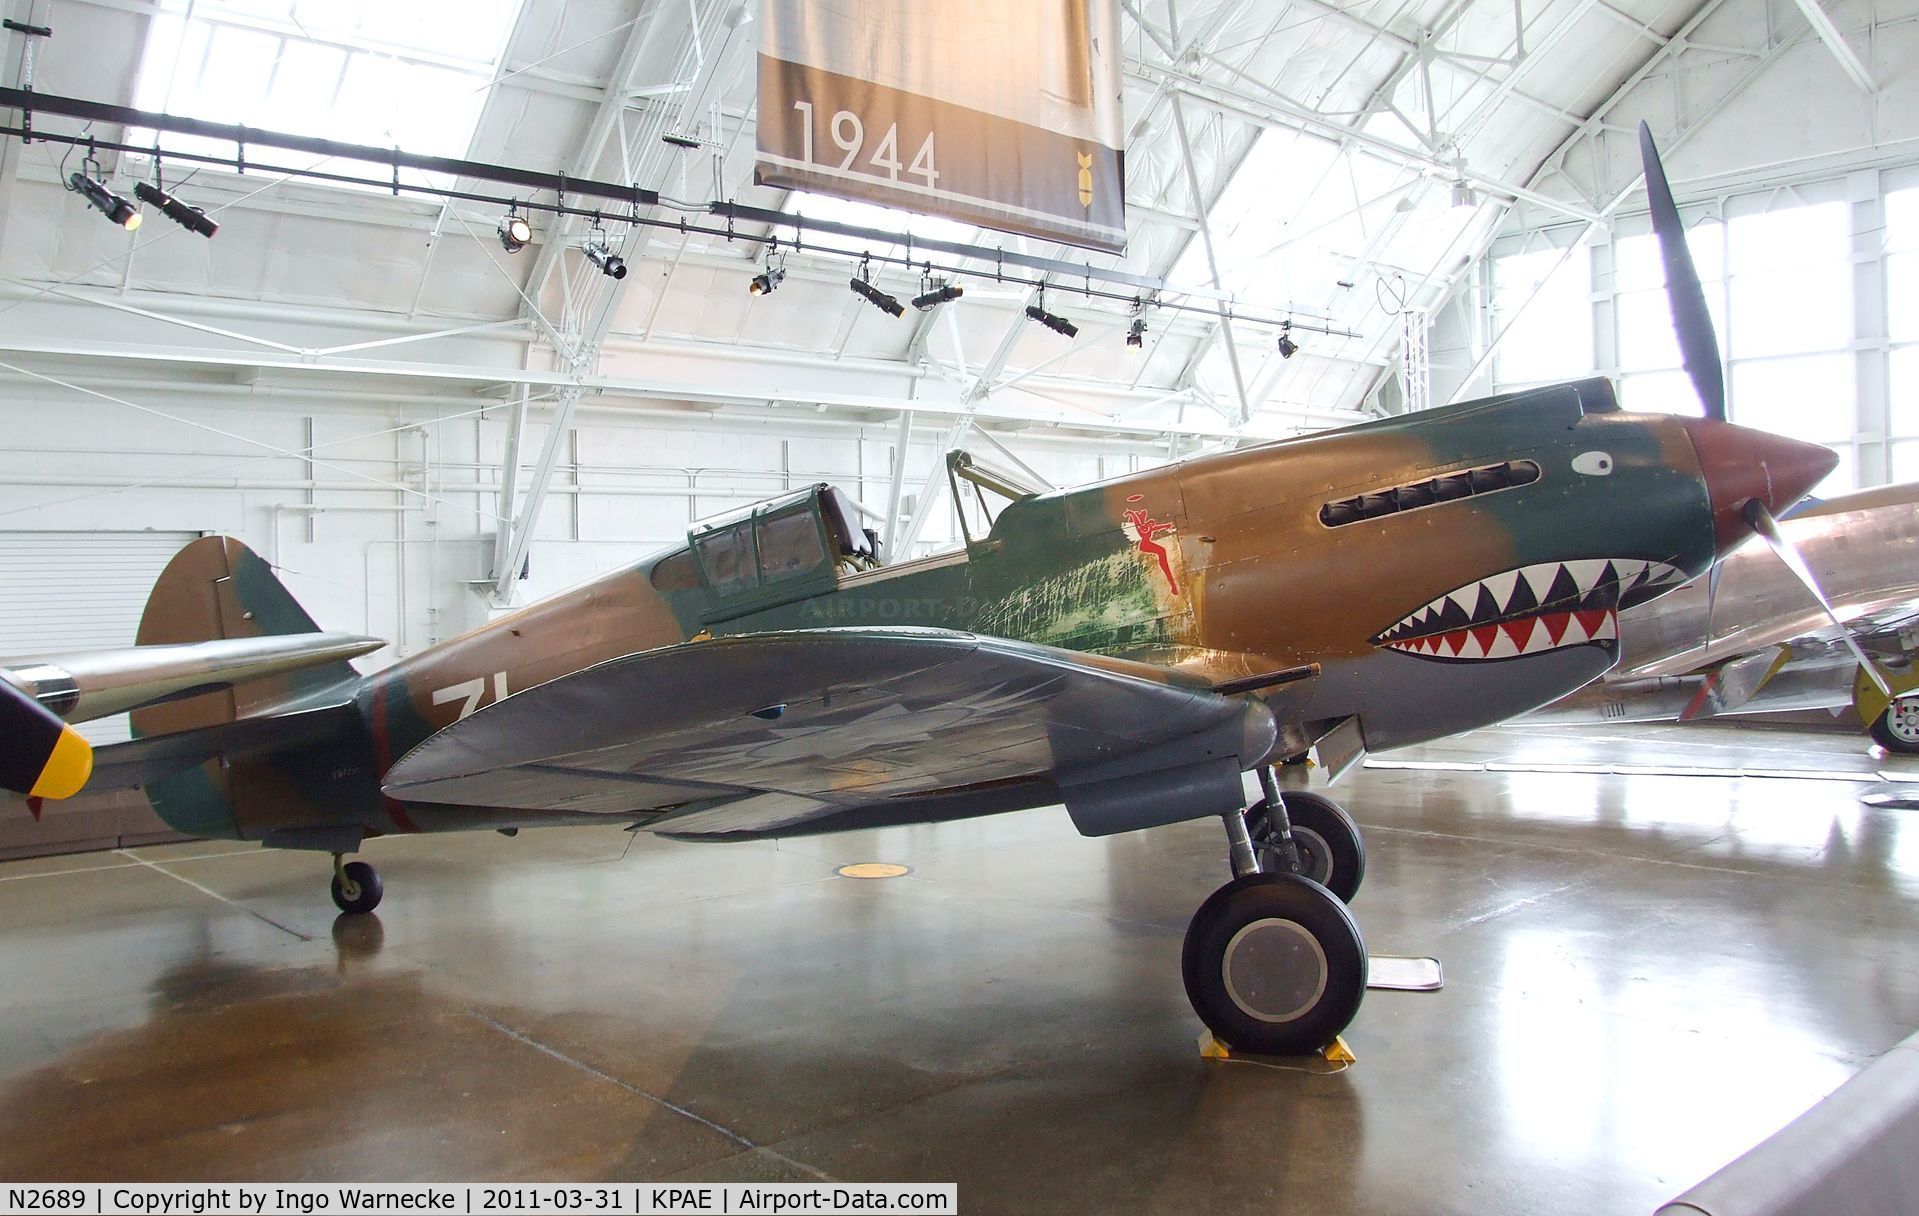 N2689, 1941 Curtiss P-40C Warhawk C/N 16166, Curtiss P-40C Warhawk at the Flying Heritage Collection, Everett WA